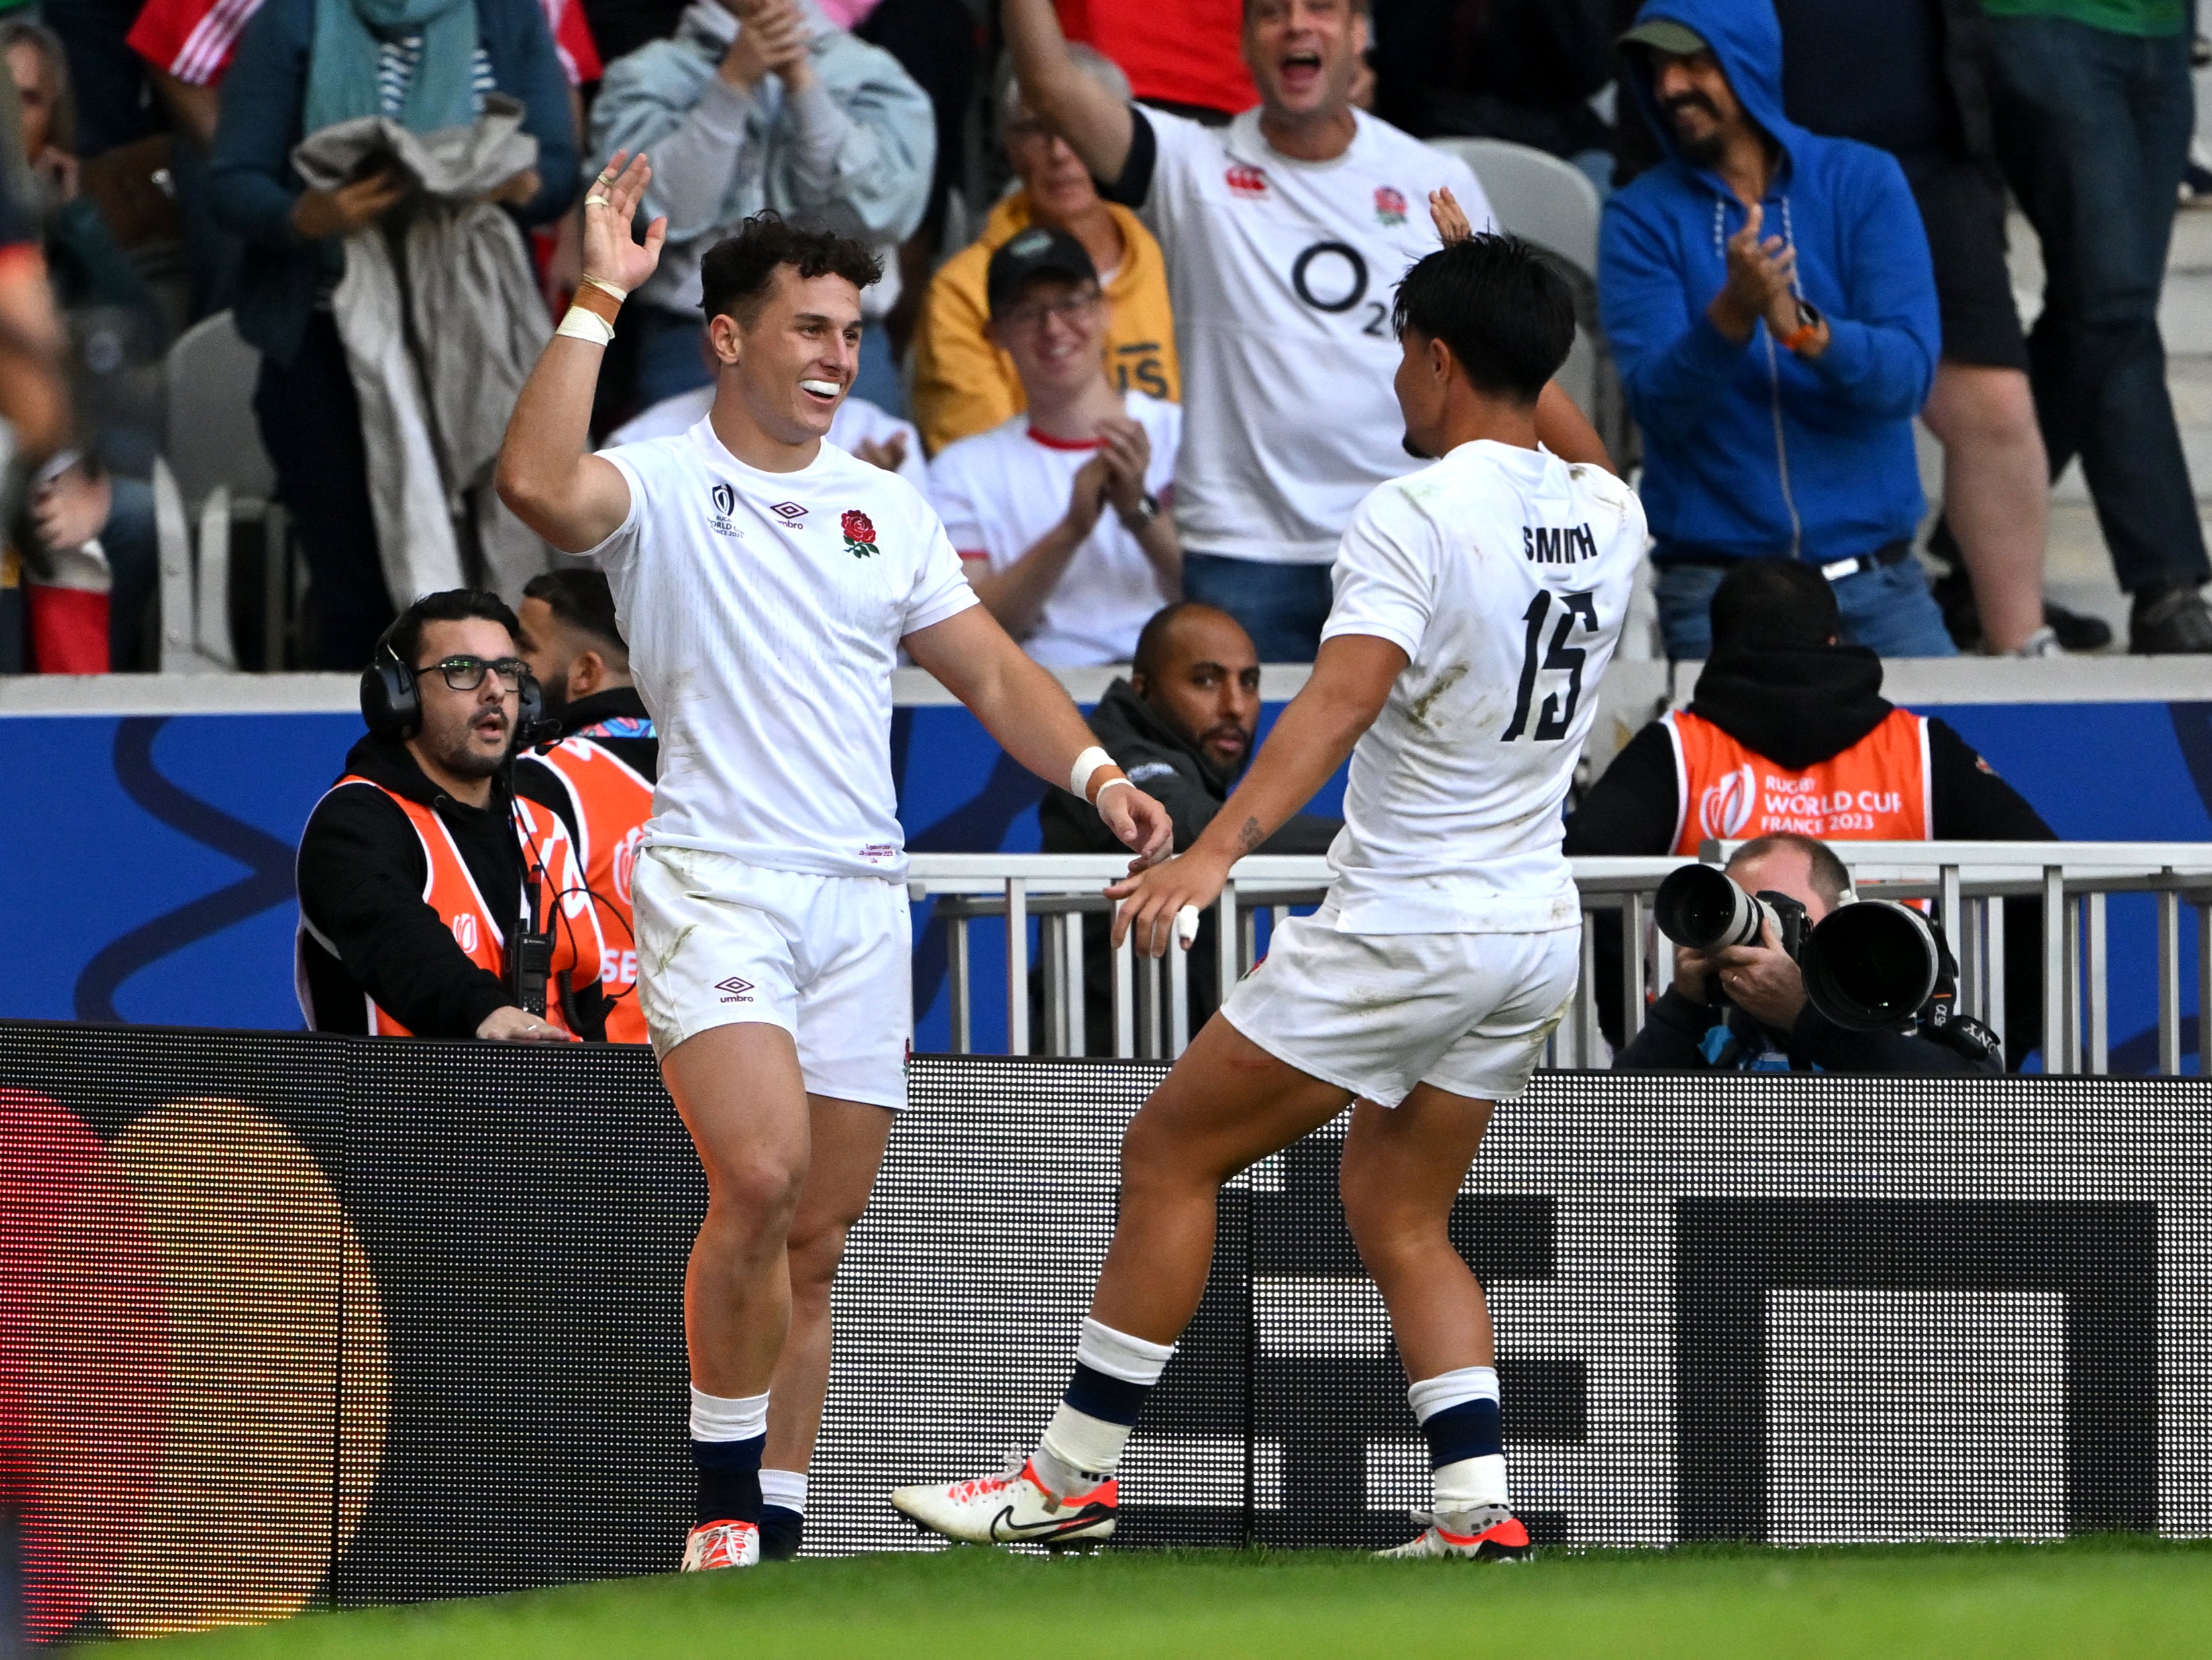 Henry Arundell scored five tries in England’s World Cup win over Chile